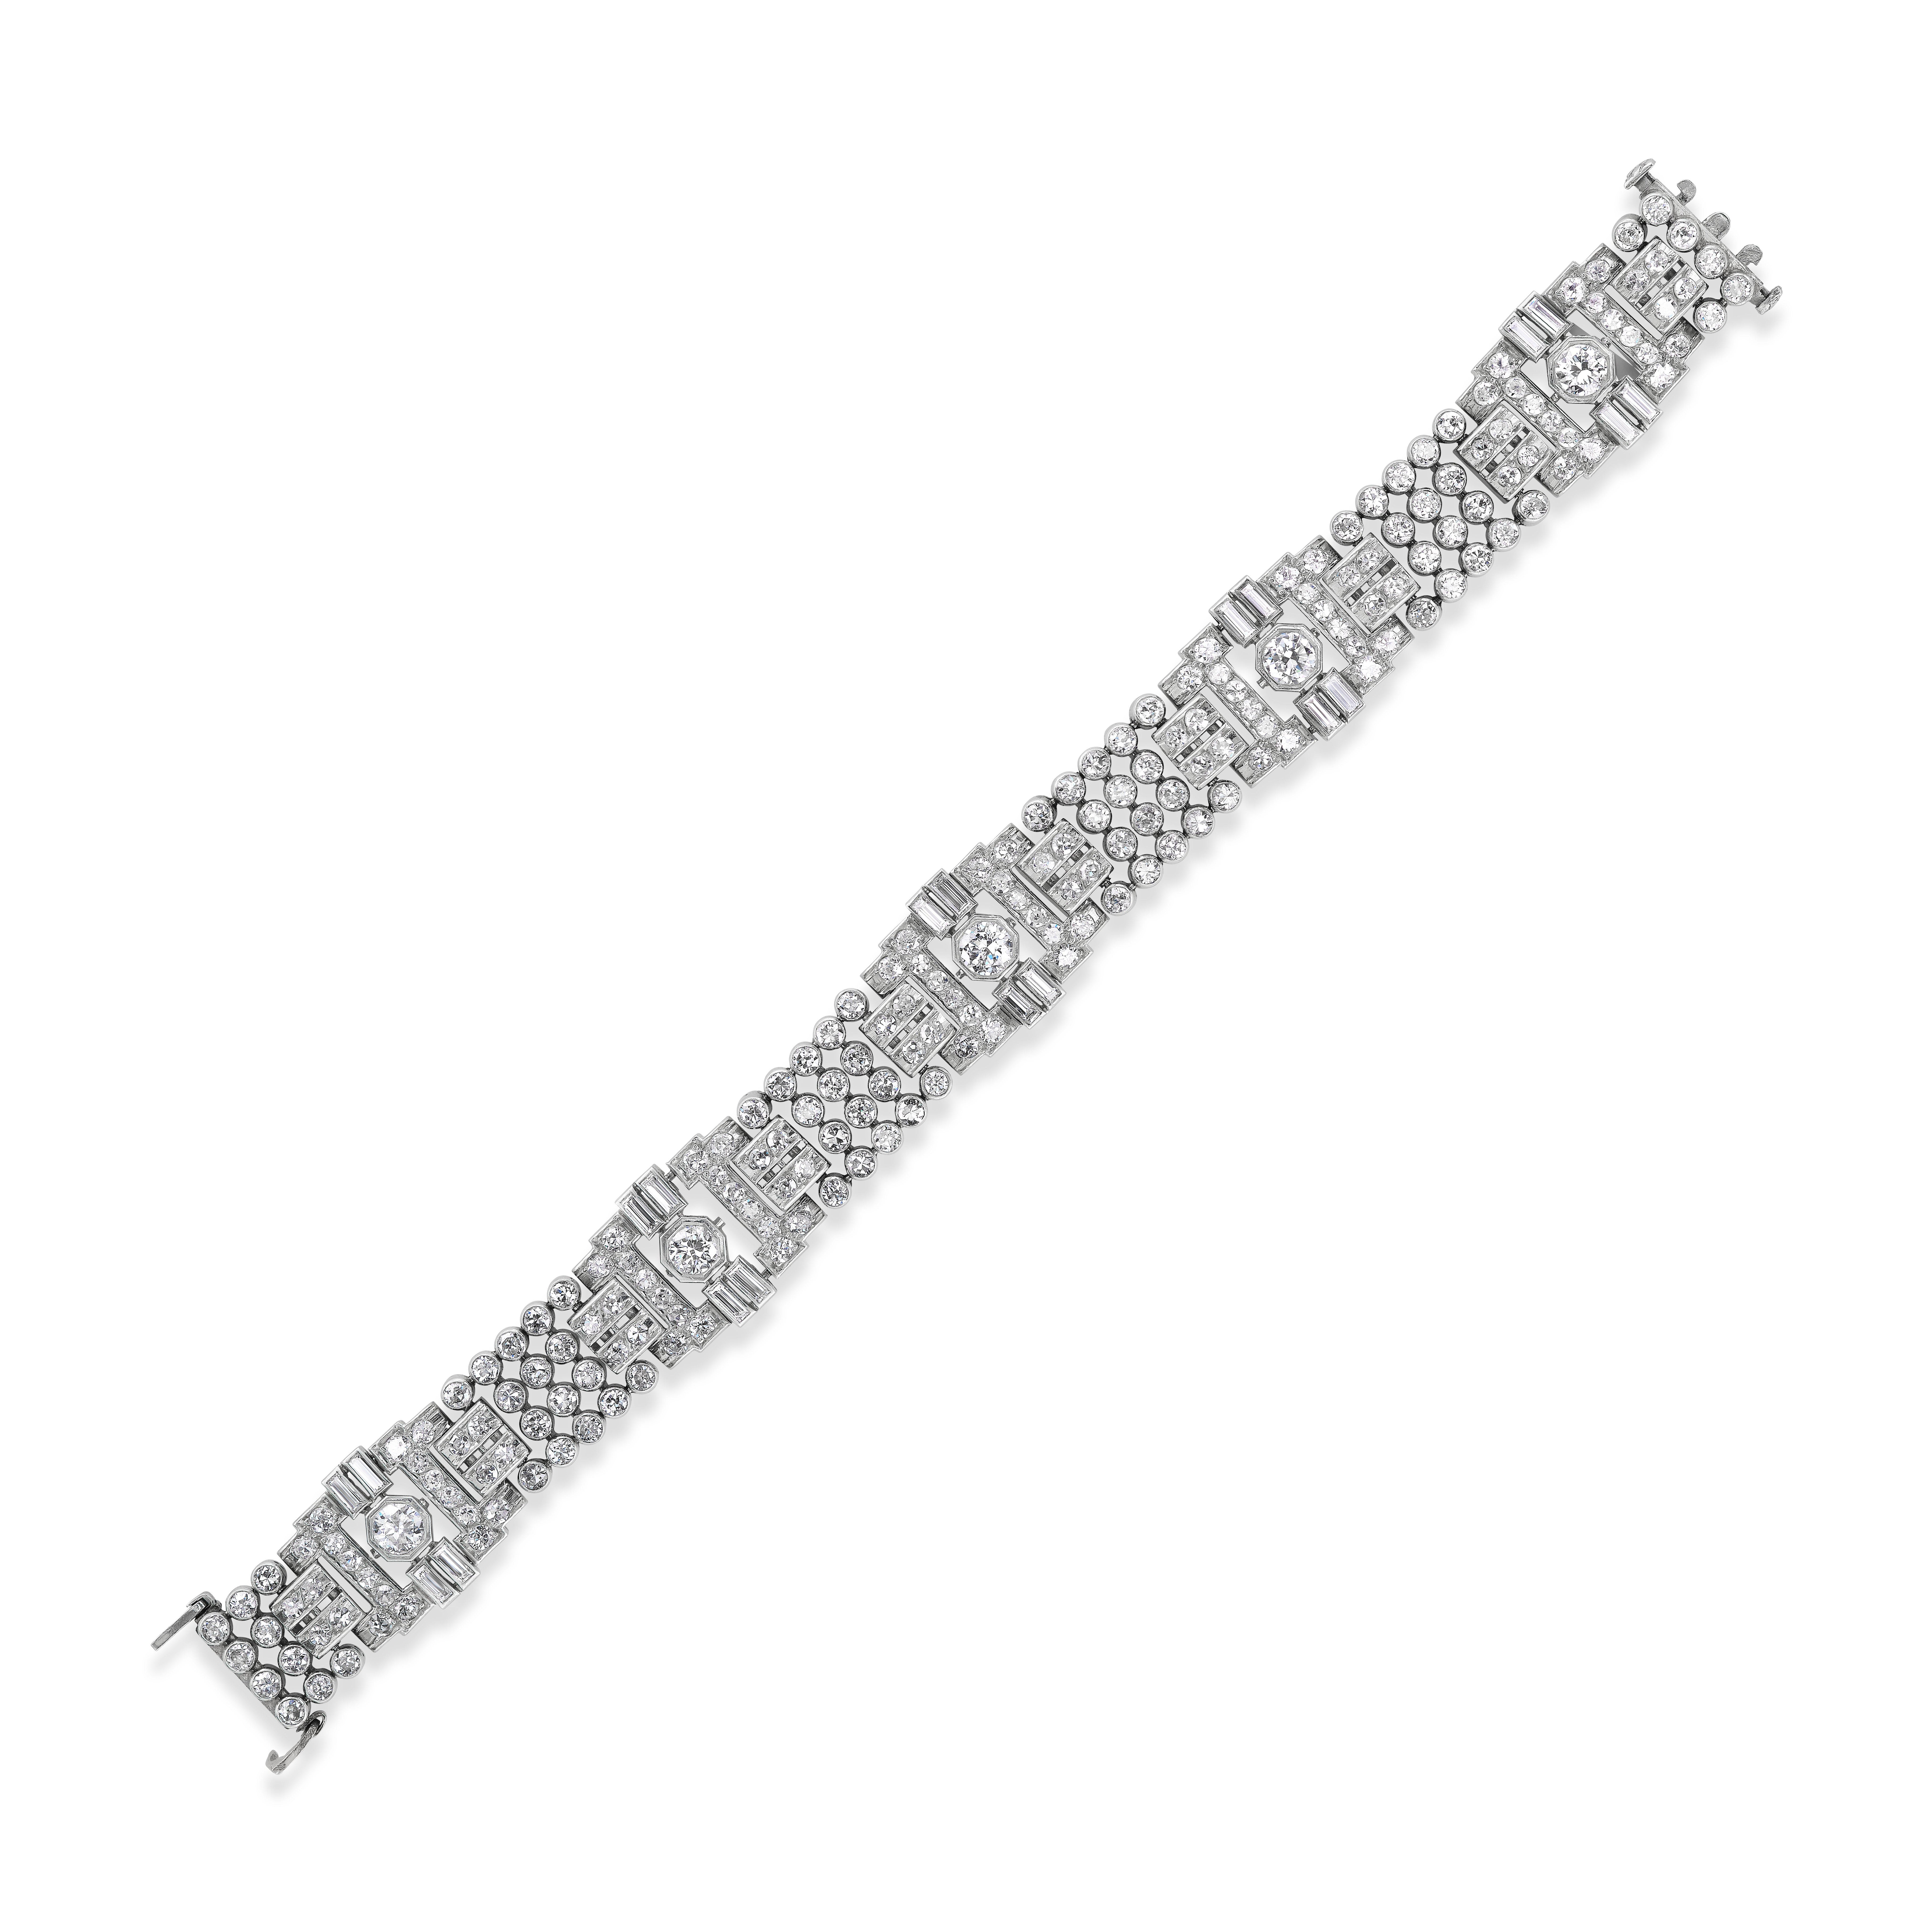 This exceptional Art Deco period bracelet consists of approximately 16.25 carats of round brilliant, single-cut, and baguette diamonds mounted in platinum. The bracelet features five sectional links, each one focusing around a round brilliant